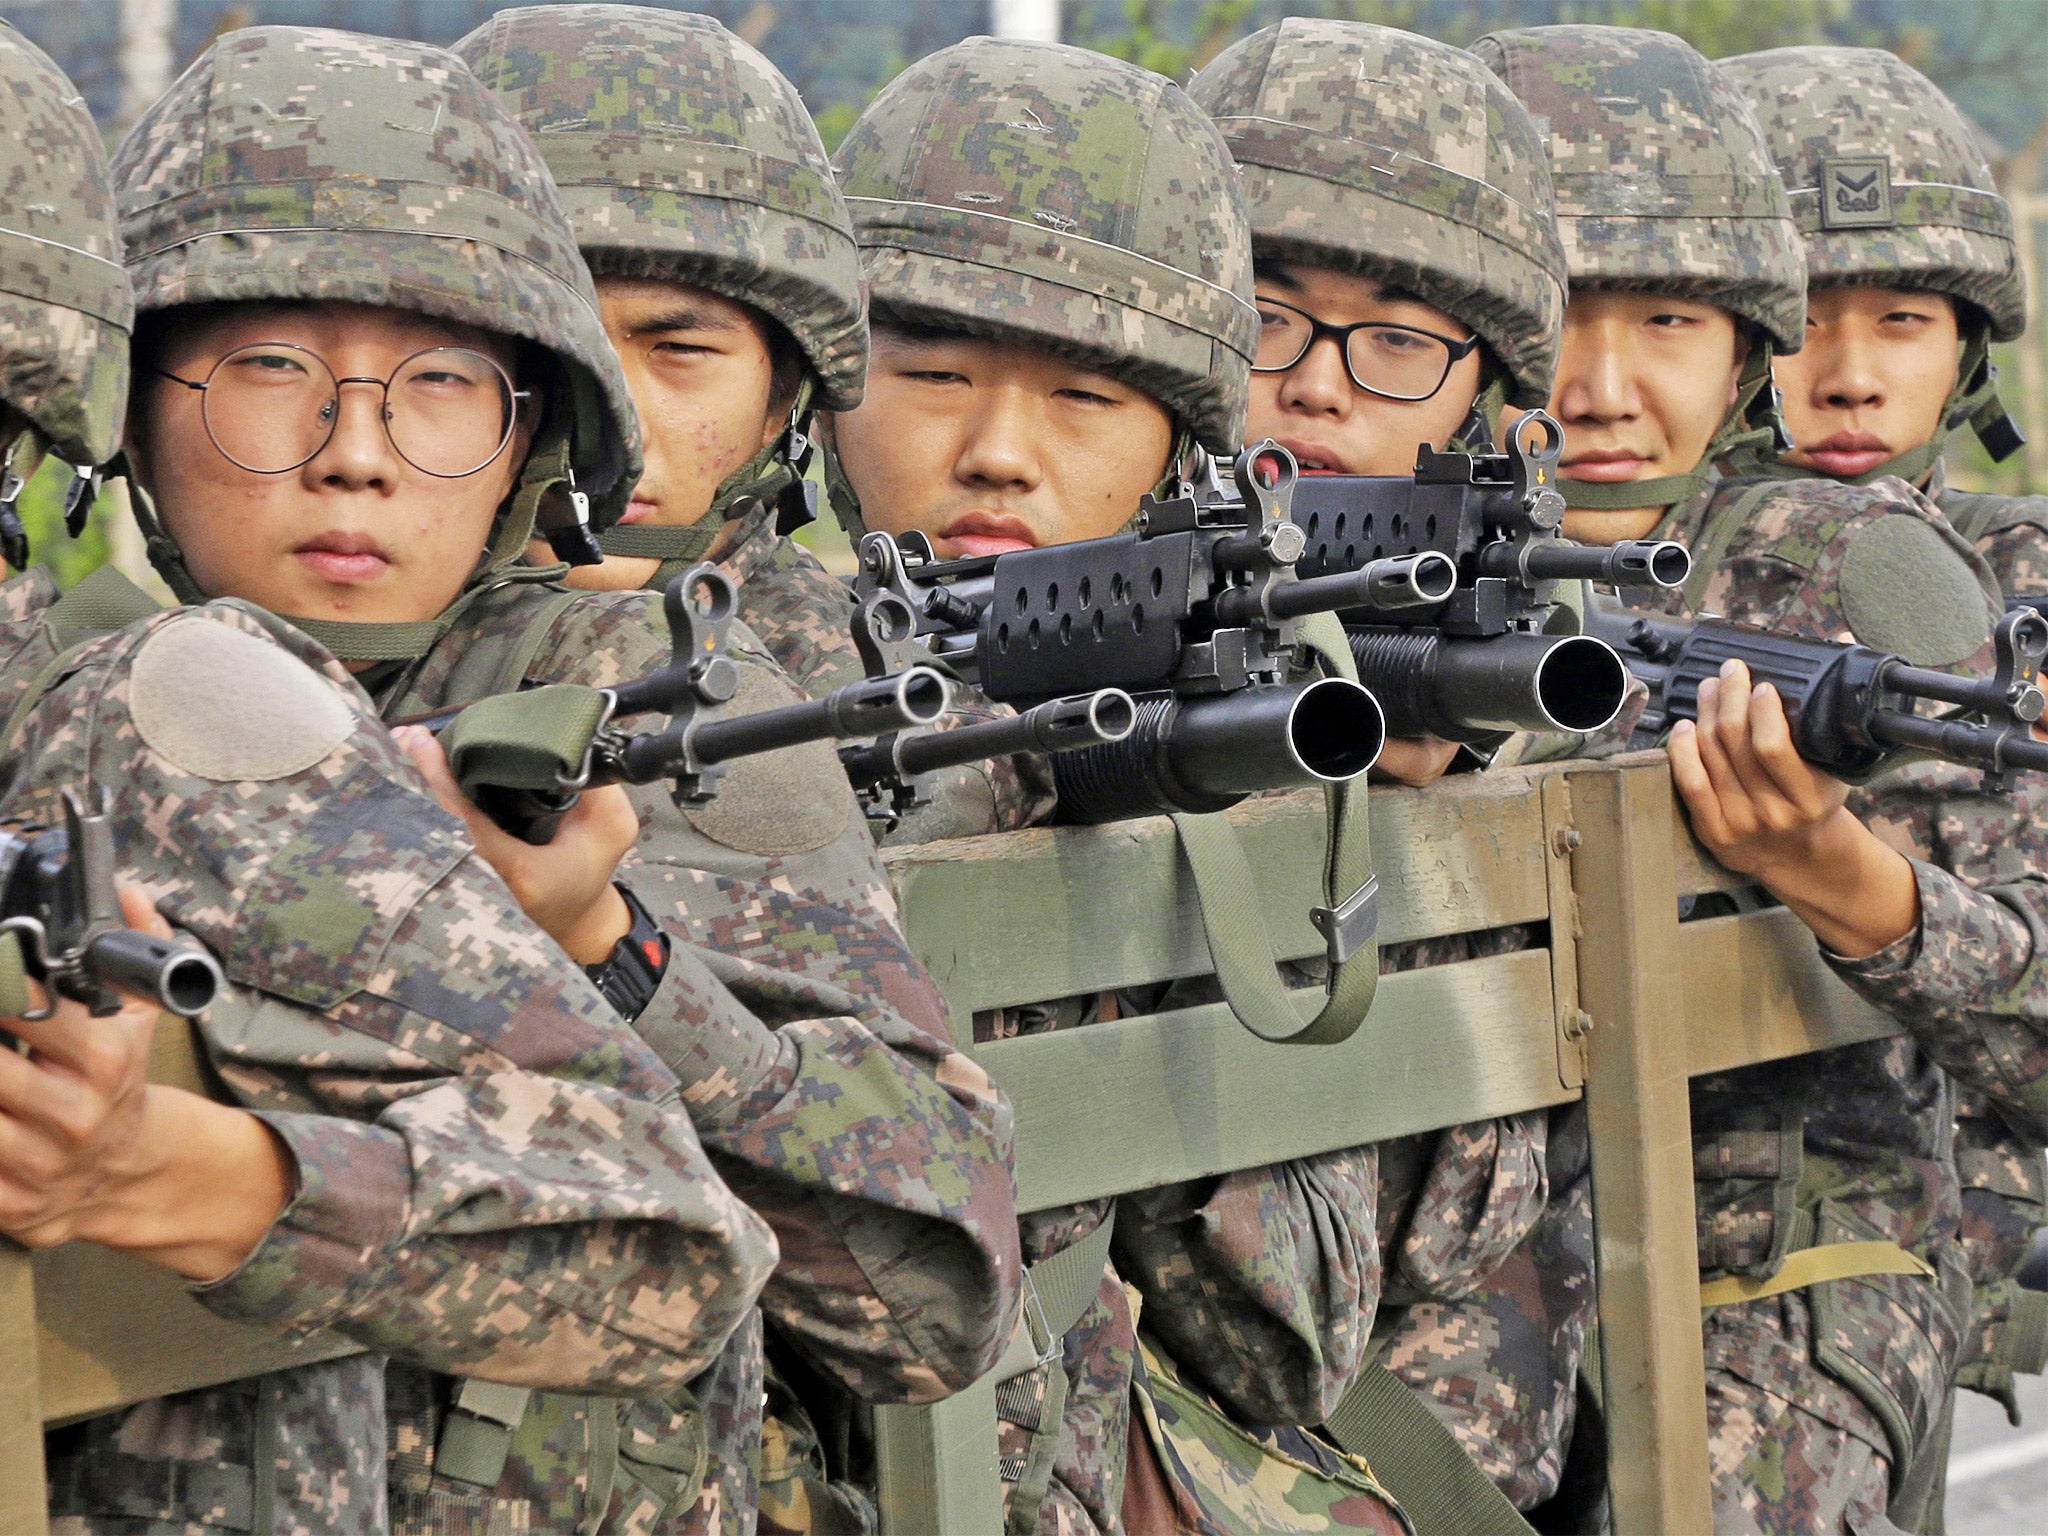 South Korean soldiers retreat from the DMZ after the deal